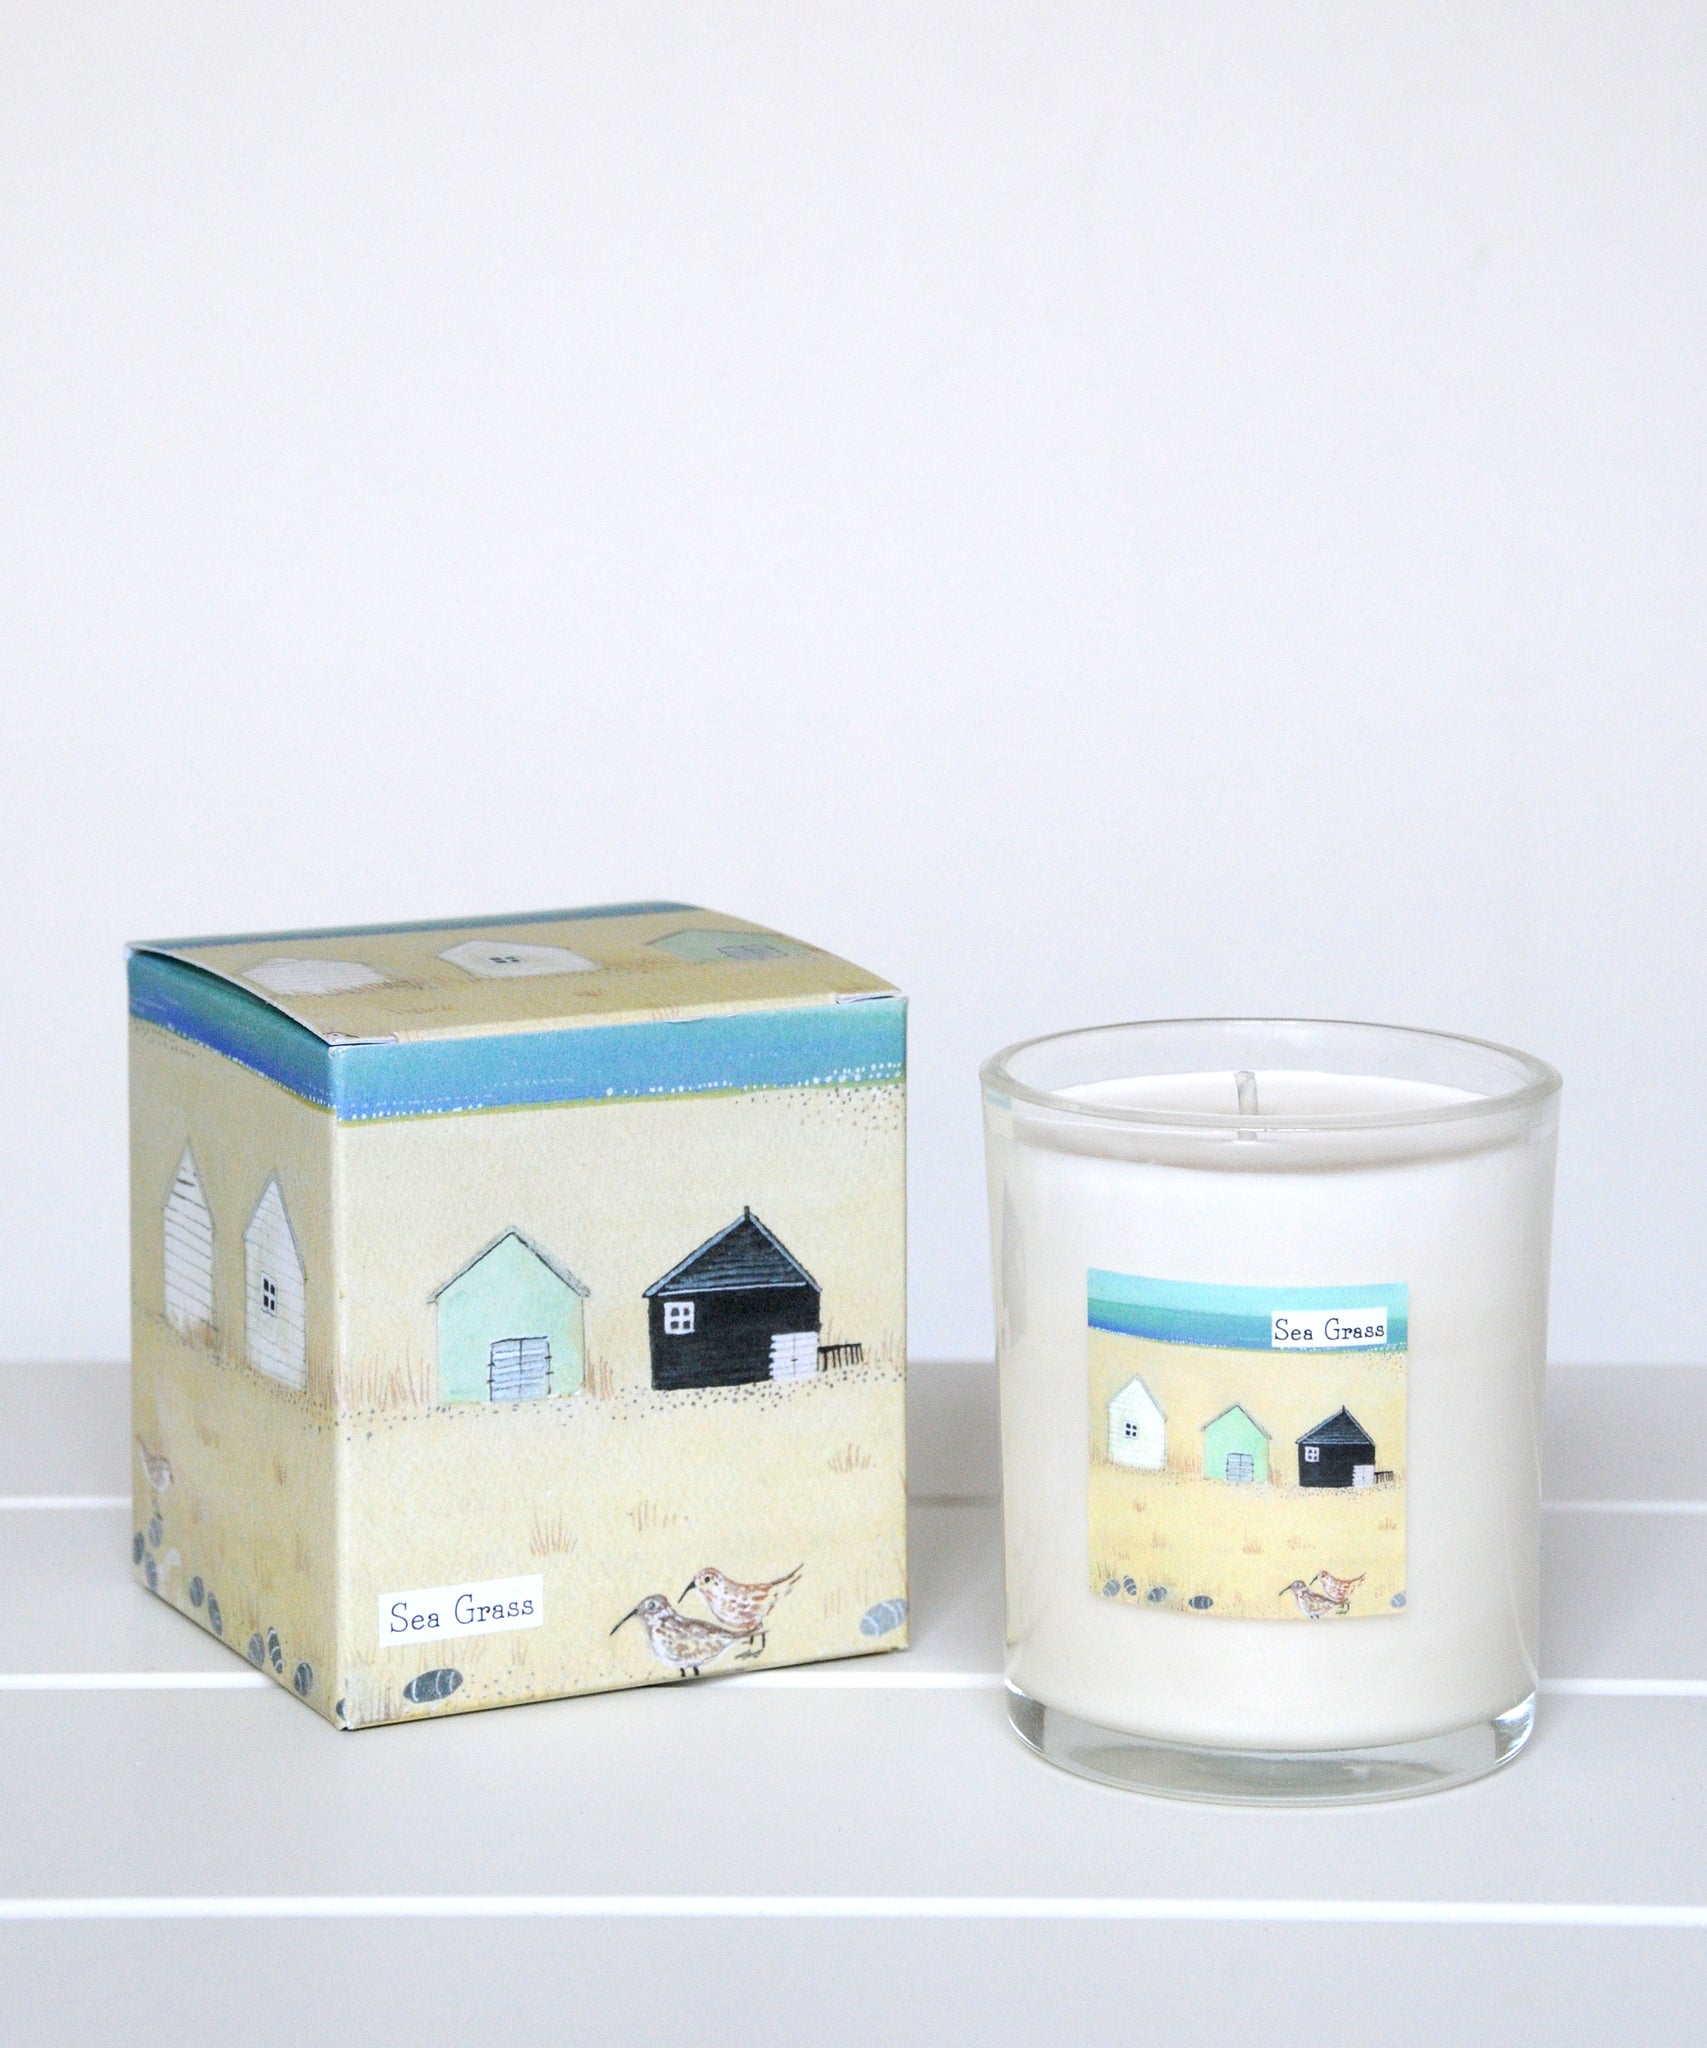 Large Sea Grass candle